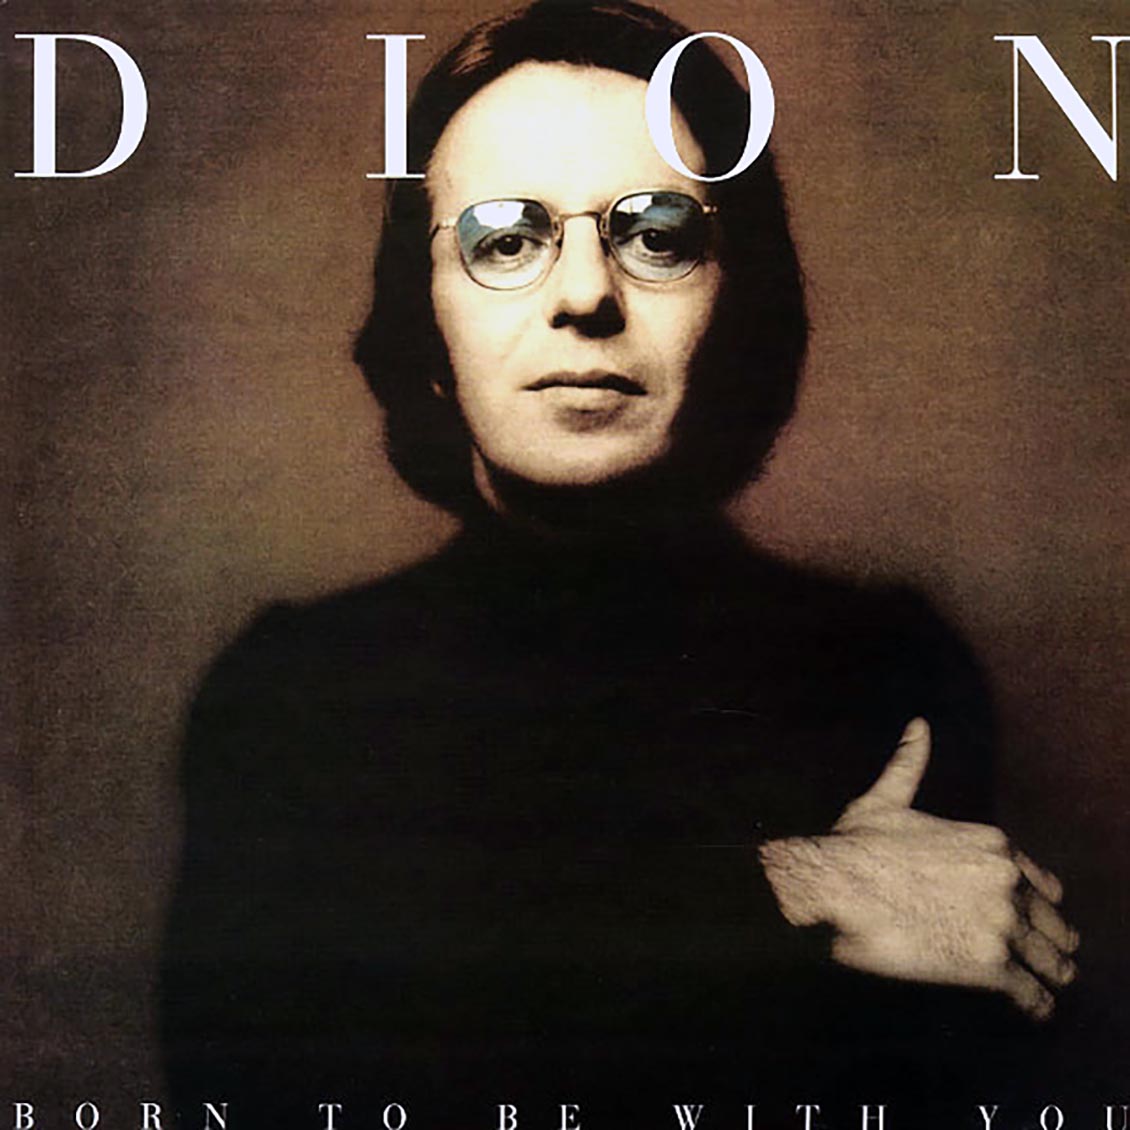 Dion - Born To Be With You (180g) - Vinyl LP